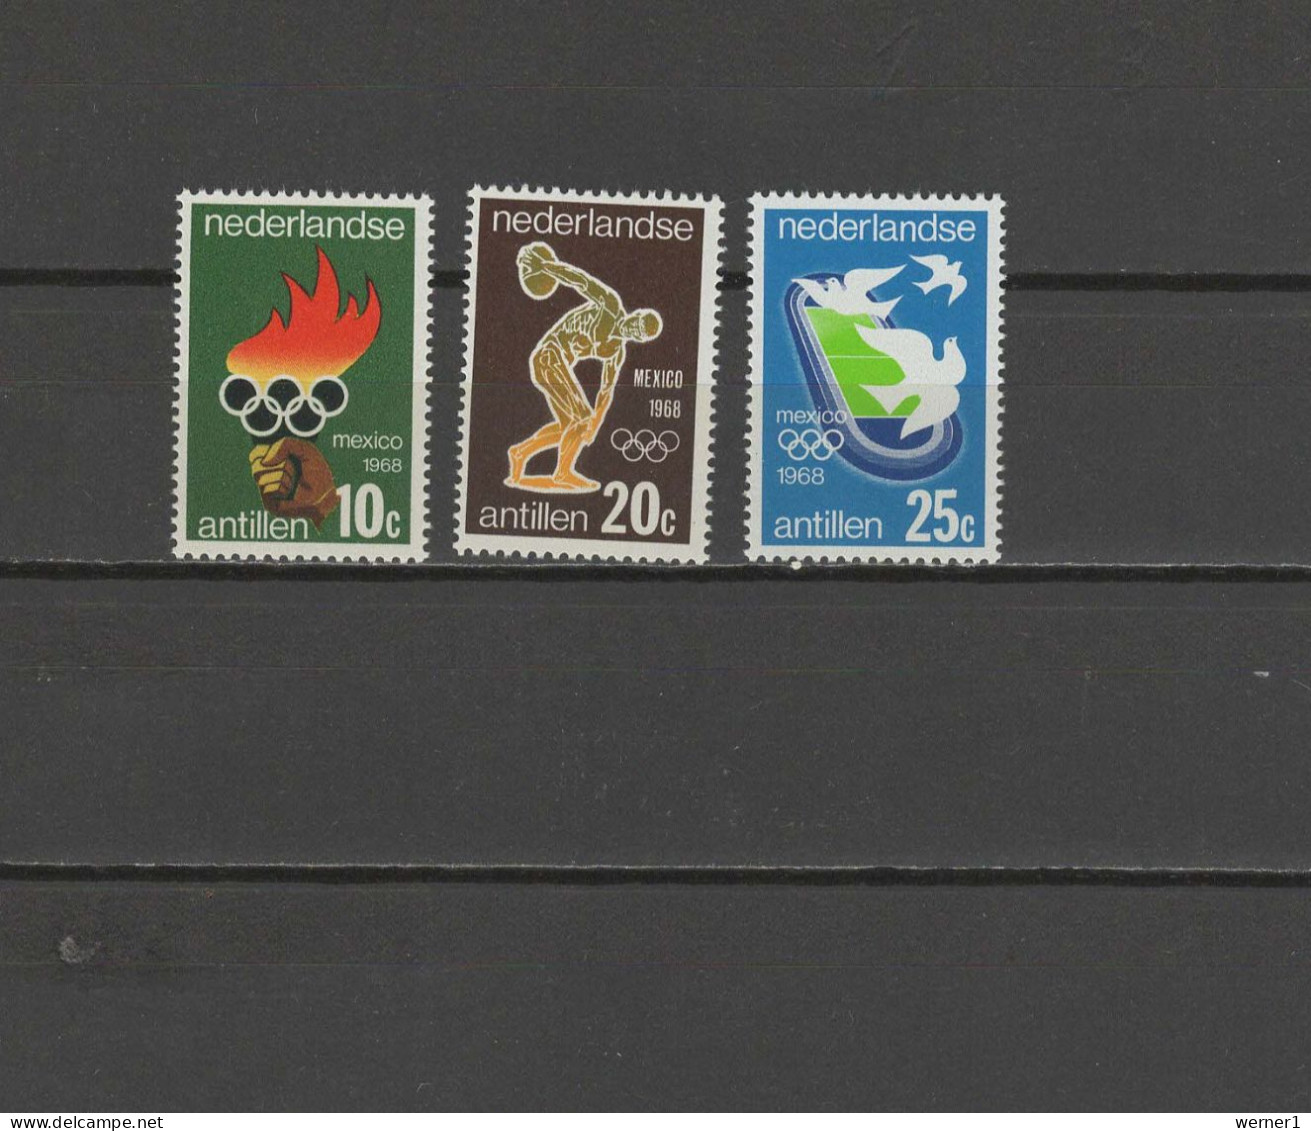 Netherlands Antilles 1968 Olympic Games Mexico Set Of 3 MNH - Ete 1968: Mexico